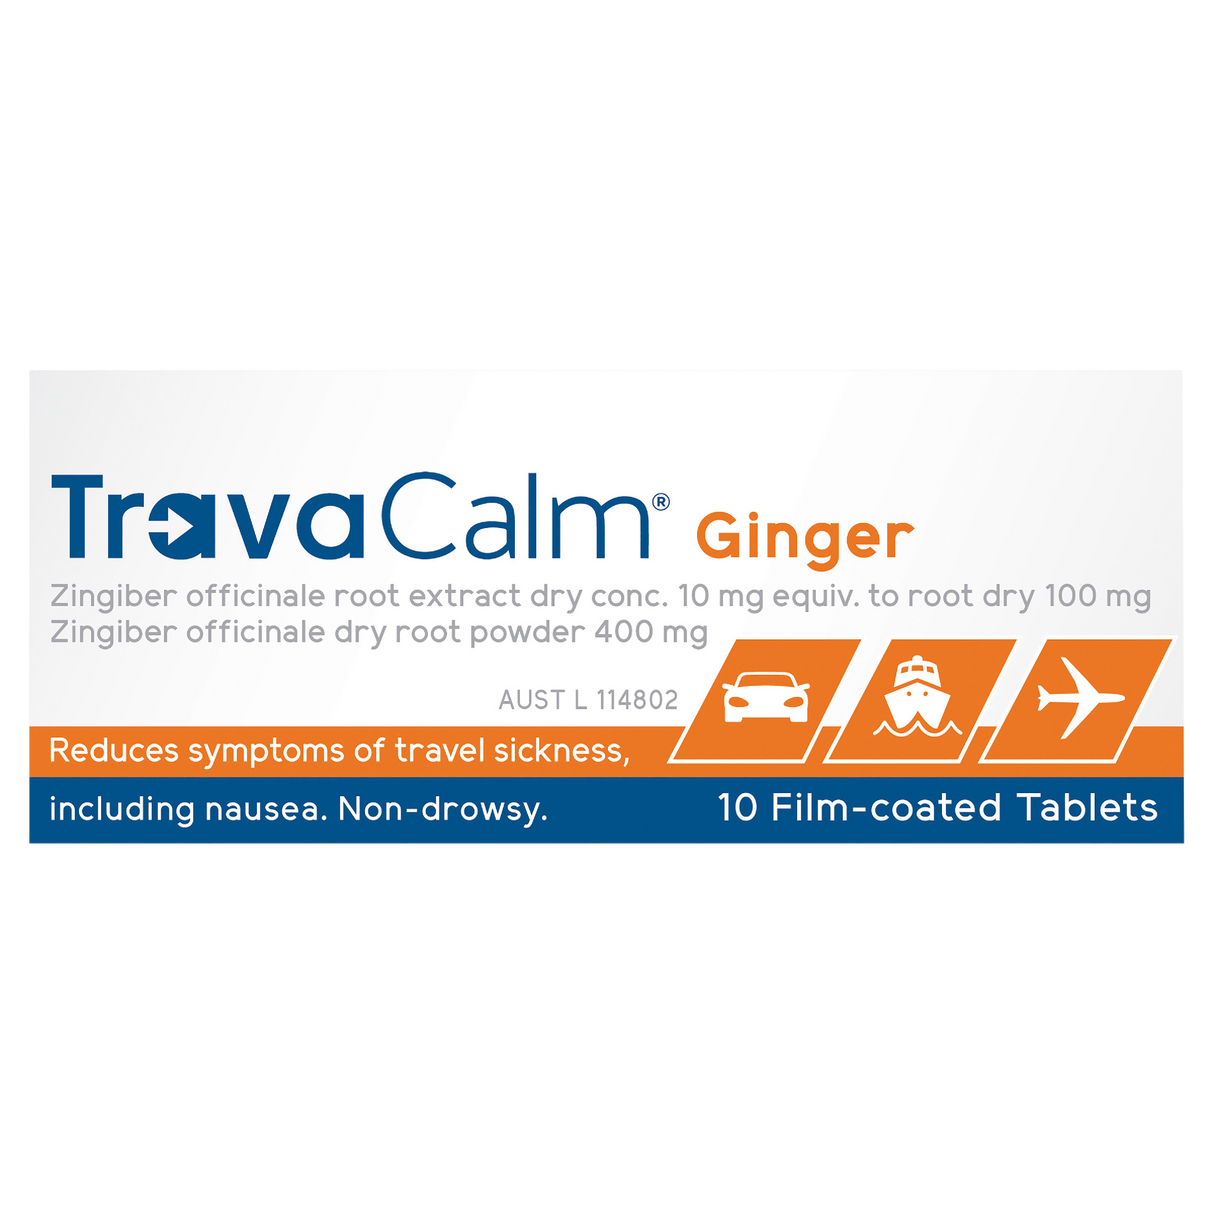 TravaCalm Ginger 10 Tablets